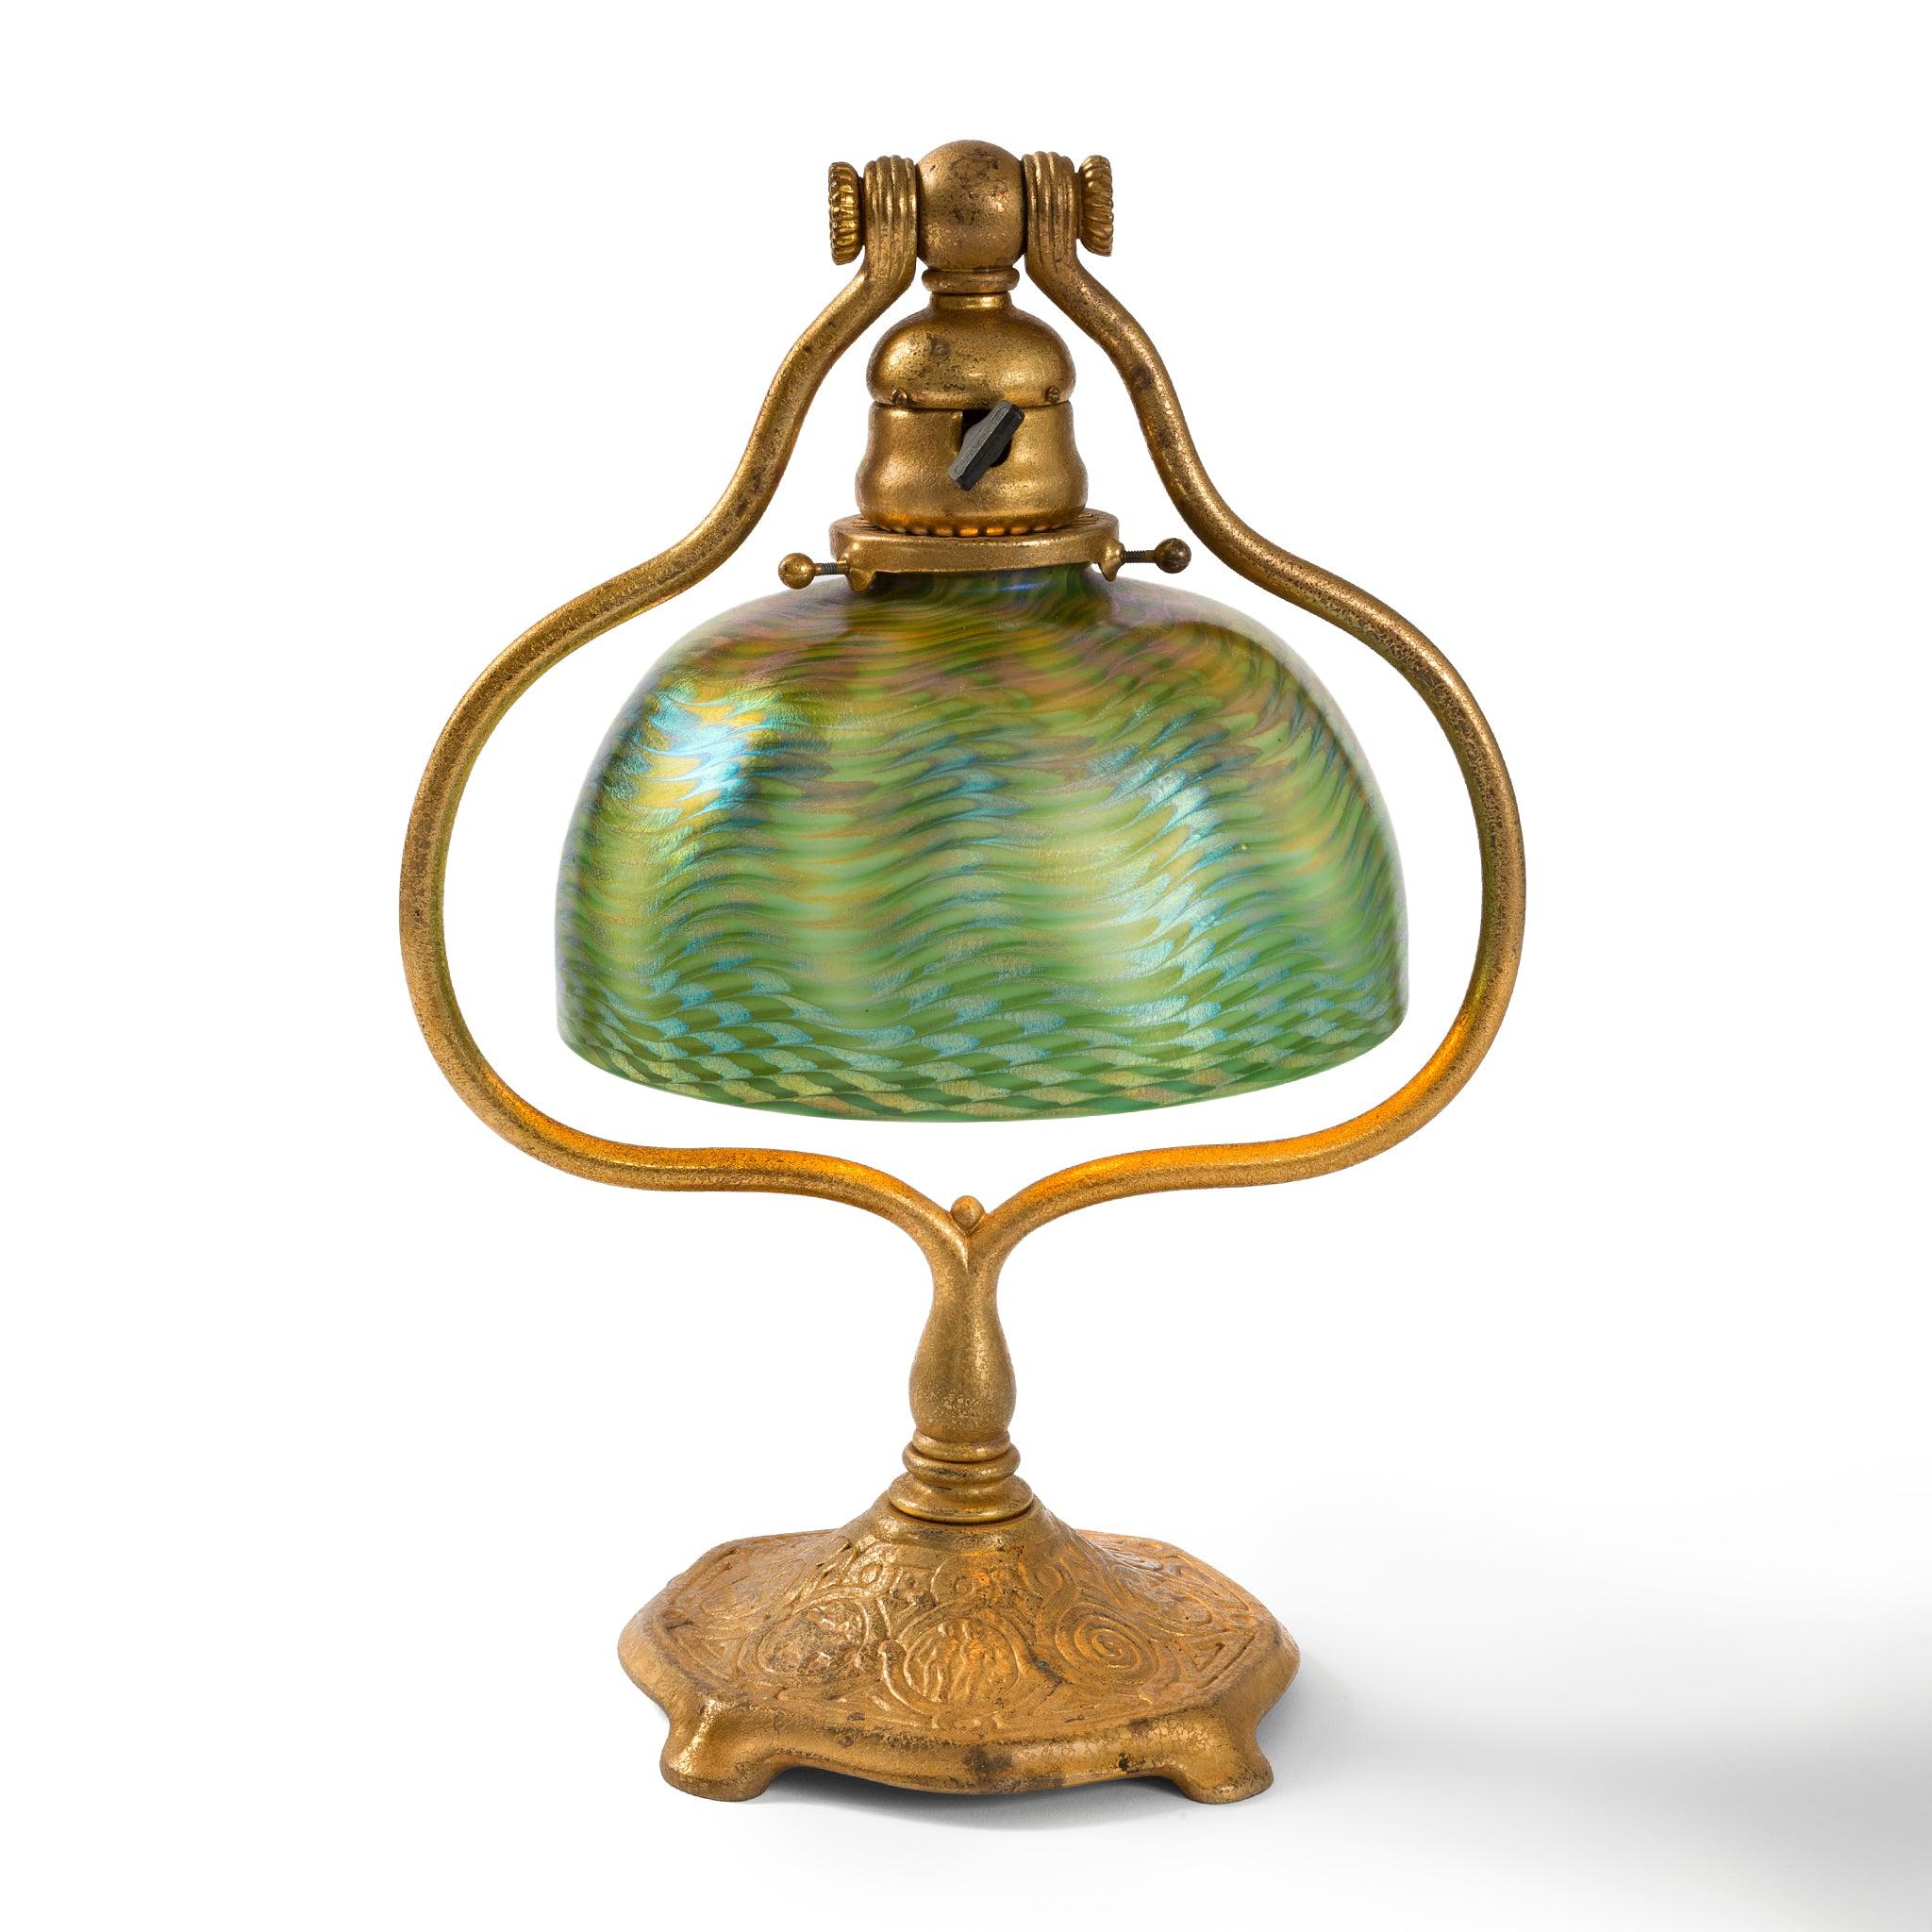 Dating from 1906-1920, this Tiffany studios desk lamp is composed of Damascene favrile glass and a gilt bronze Zodiac base. The green domed shade with golden brown accents exhibits a wave pattern, with subtle iridescent touches, and is suspended